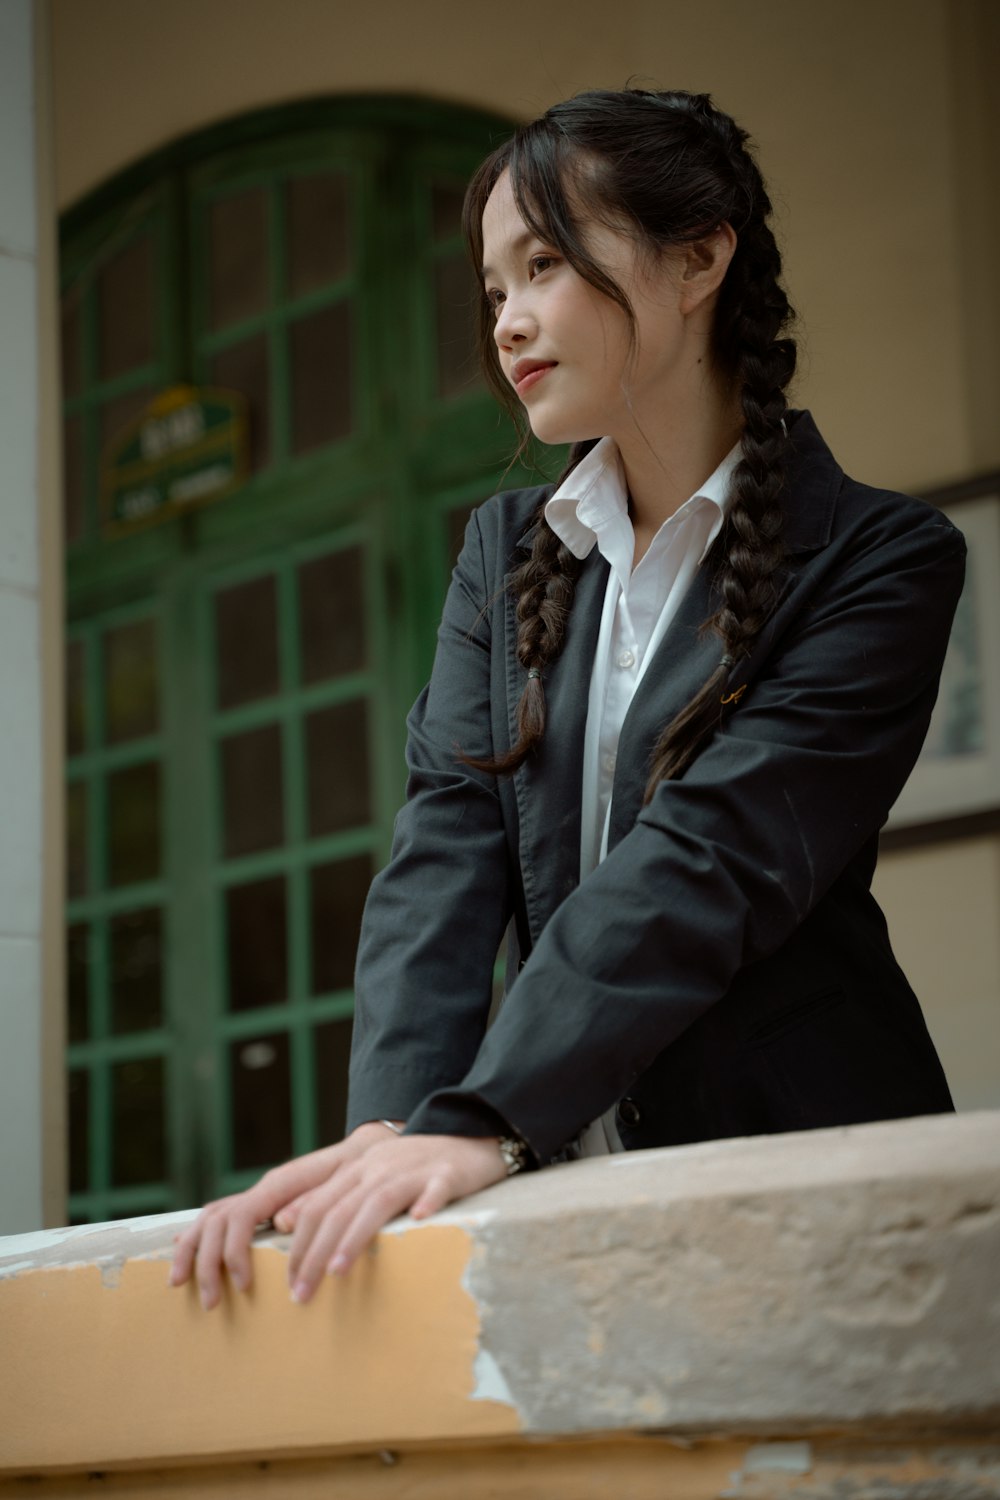 a woman in a business suit leaning on a ledge